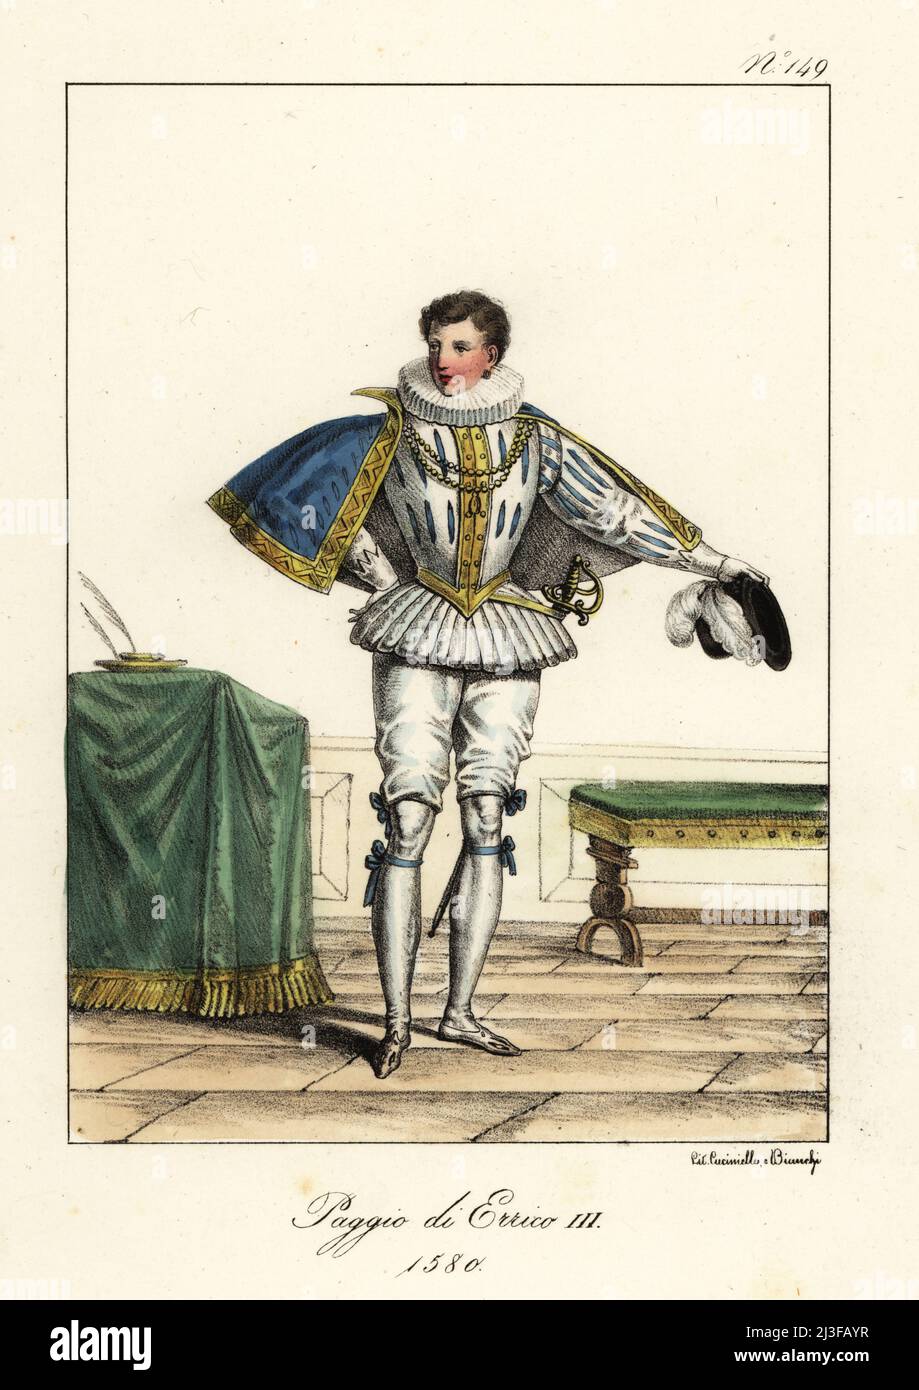 Costume of a page to King Henry III of France, 1580. In ruff collar, short  cape, slashed doublet, breeches, hose and shoes. Page du Roi Henri III.  Handcoloured lithograph by Lorenzo Bianchi